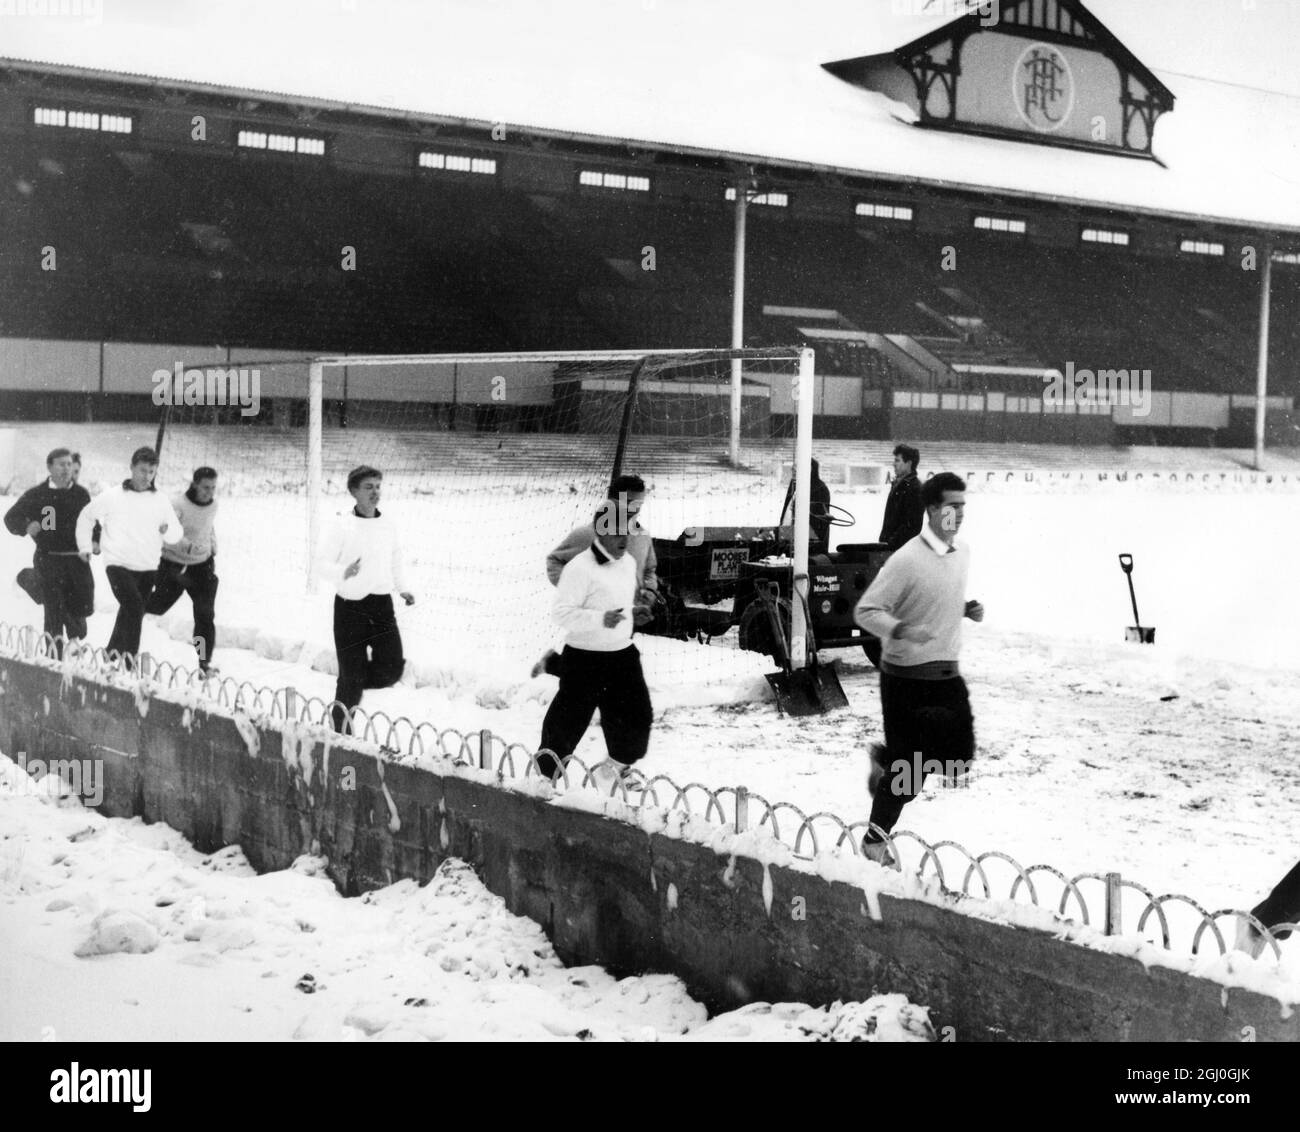 Tottenham Hotspur train in the snow - Spurs players, headed by Maurice Norman, getting in some running practice at their White Hart Lane ground whilst groundsmen are seen busily clearing the snow in an effort to get the ground clear for the Spurs cup tie versus Burnley. The cup holders played Burnley in the final last year. 1st January 1963 Stock Photo